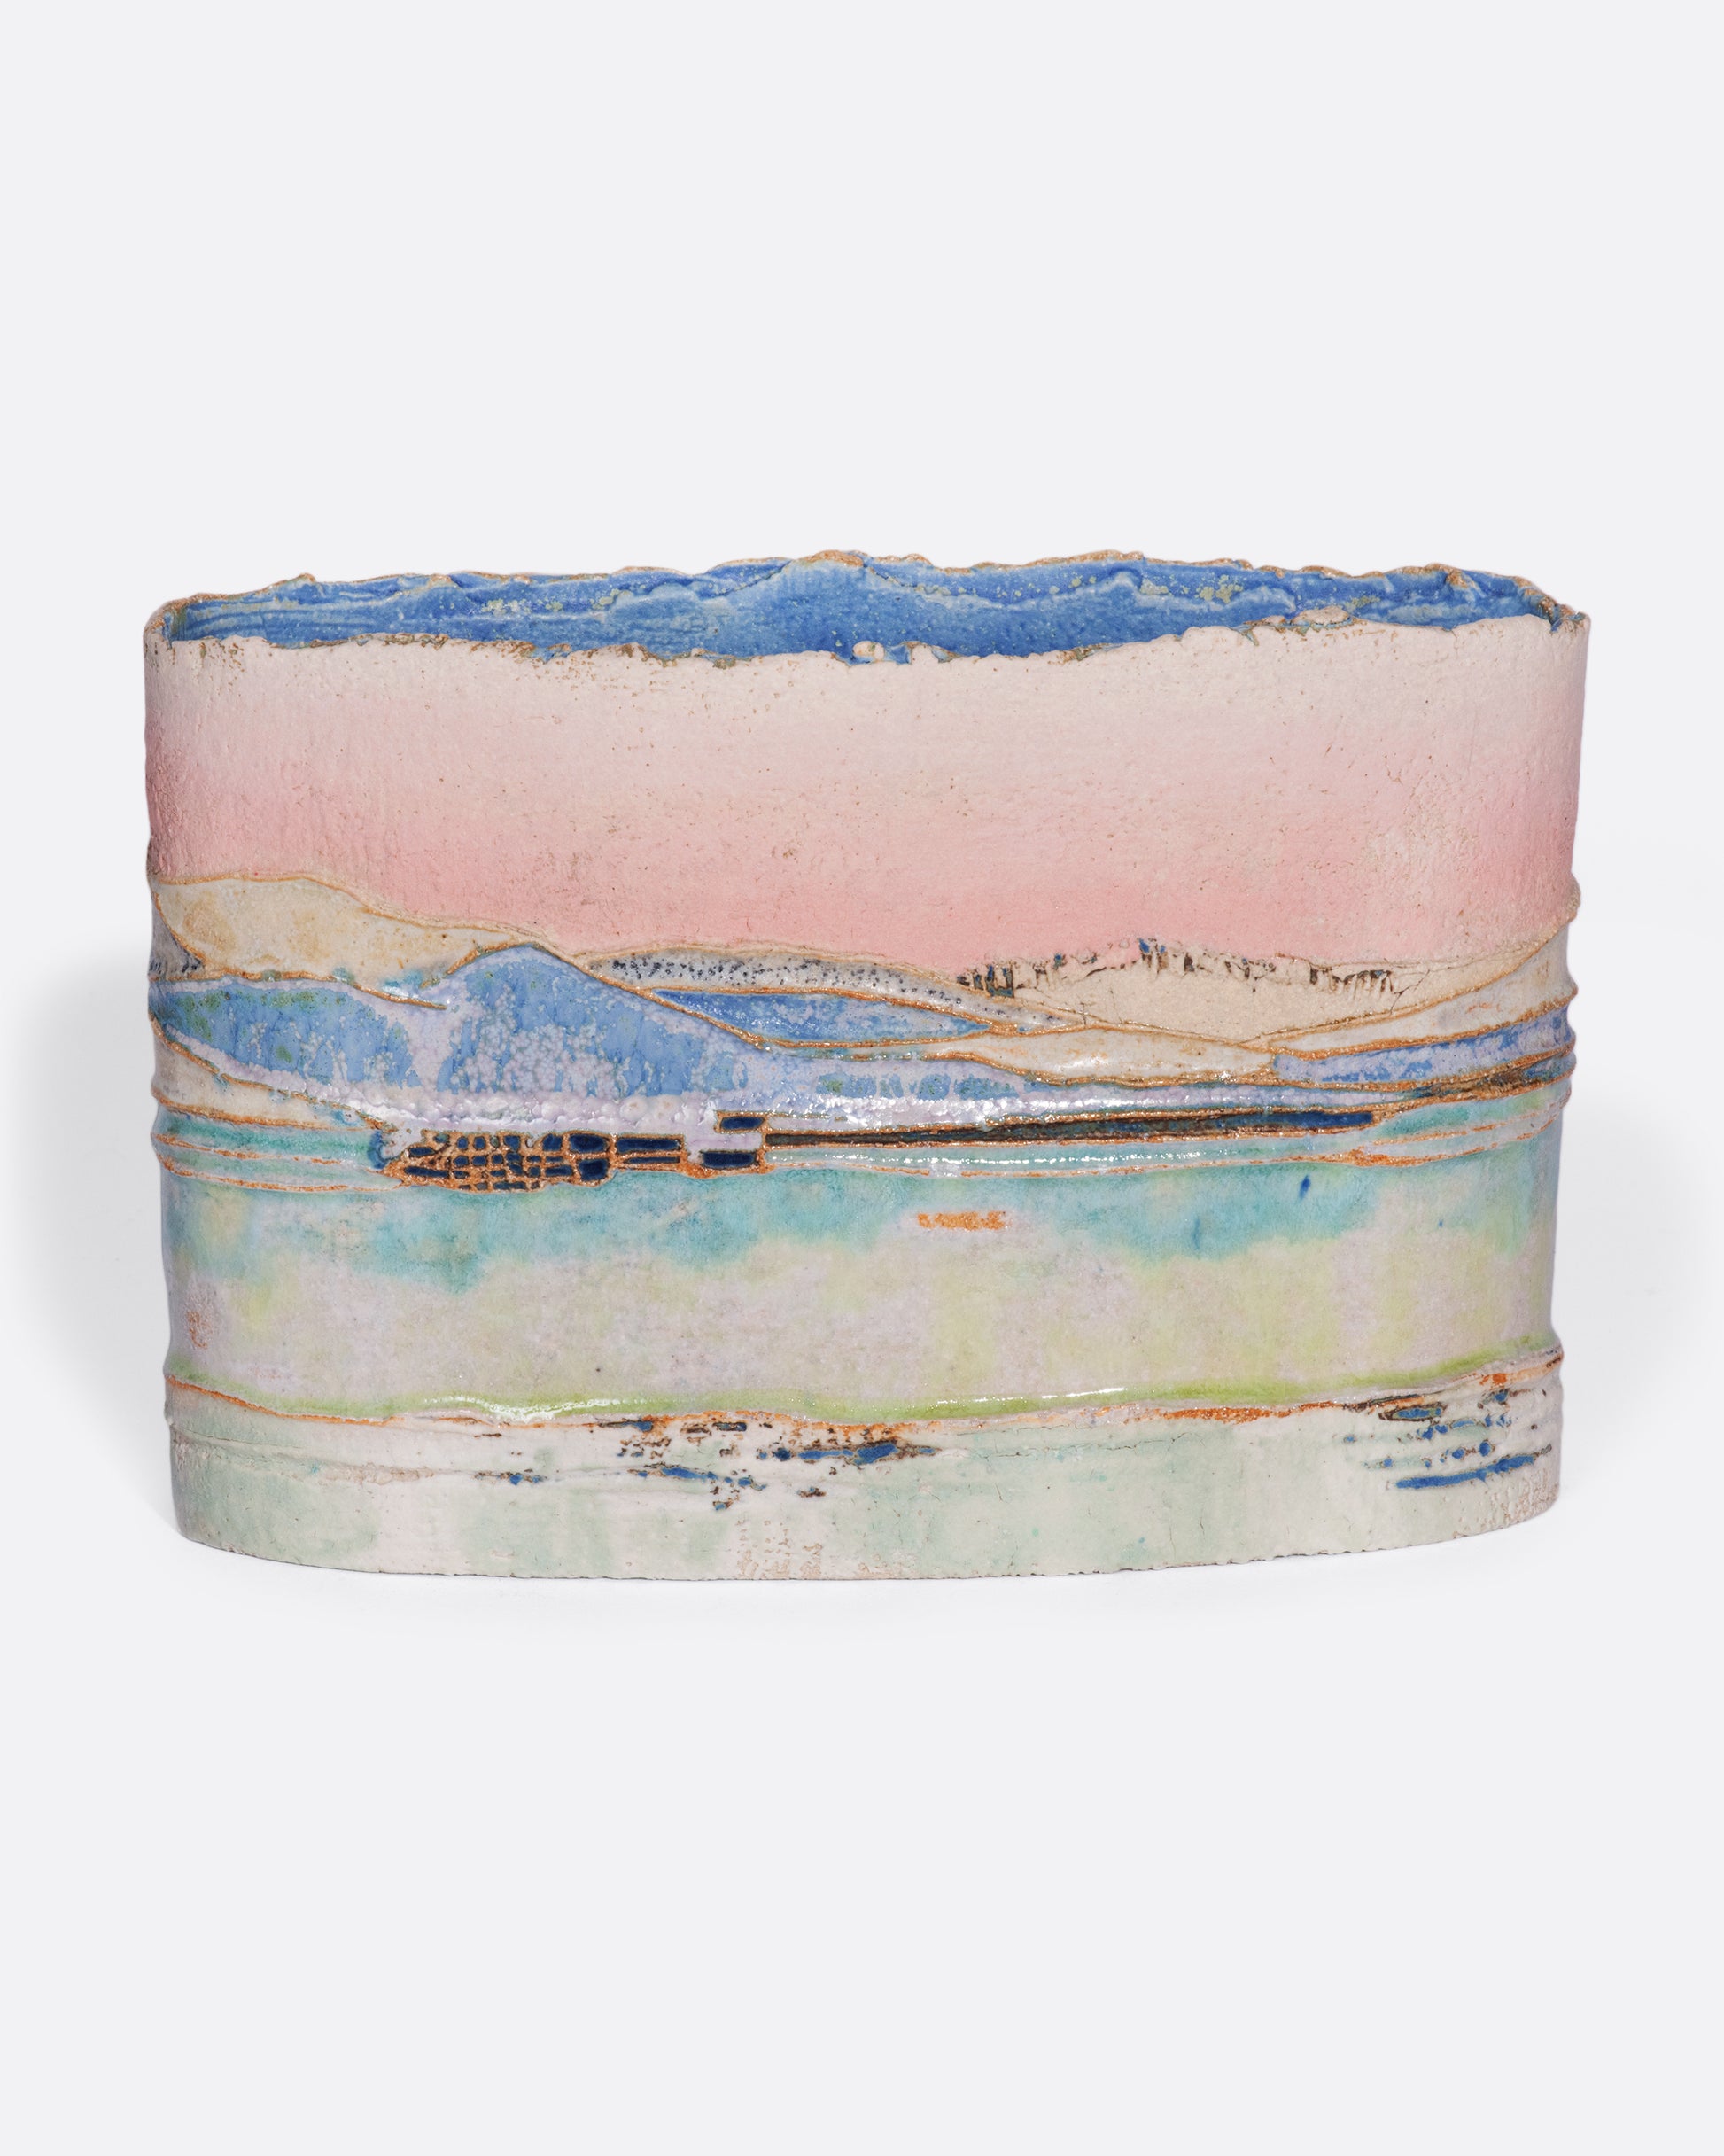 This ceramic vessel is meticulously handmade with many layers of glaze atop stoneware clay, creating a rich, varied texture. The landscape feels like you're gazing across a lake, watching clouds pass and reflect on its surface